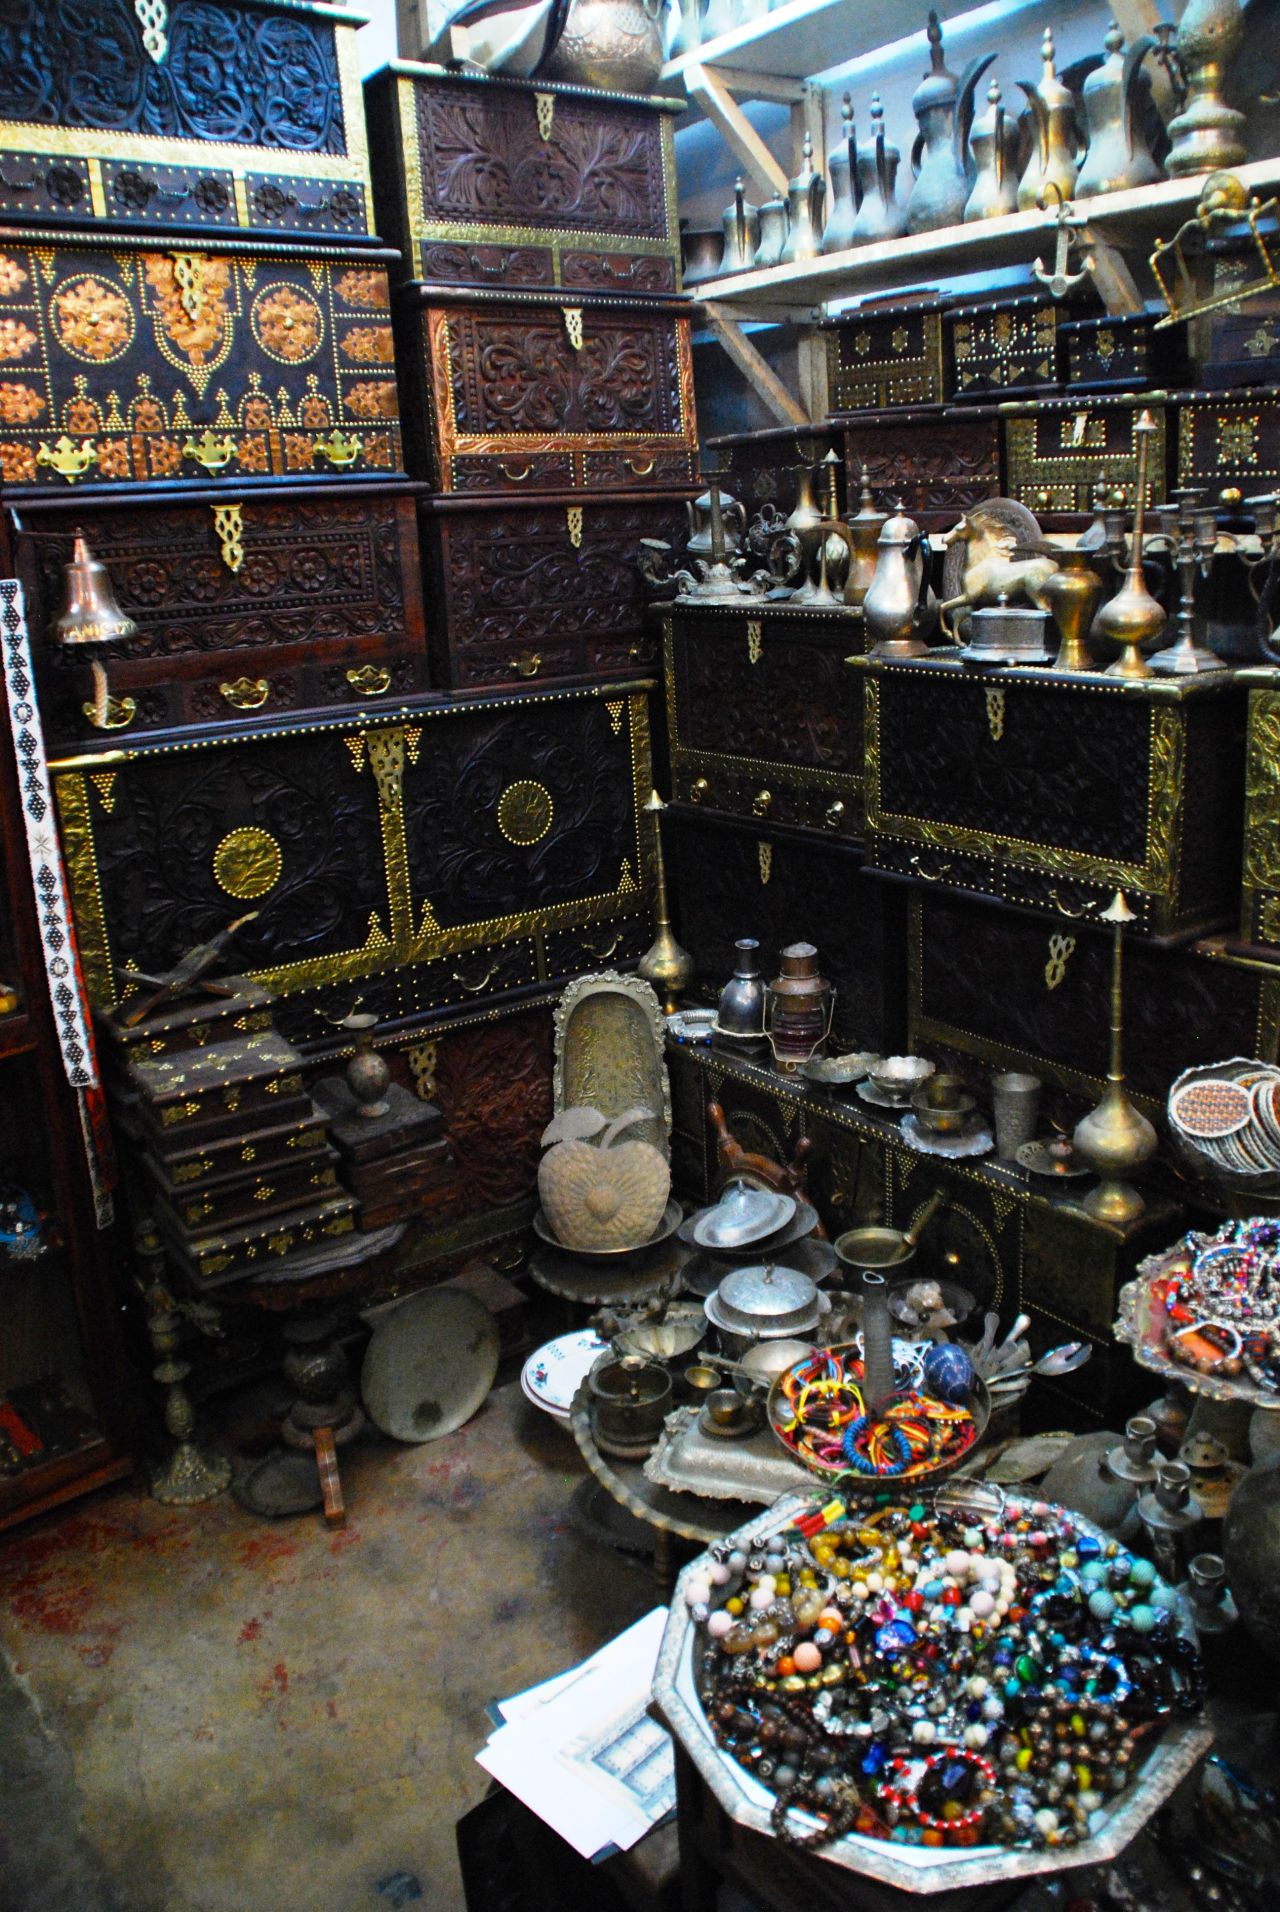 Stone Town has a huge number of bazaars and backstreet shops, stocked with furniture, jewelry and all manner of trinkets.